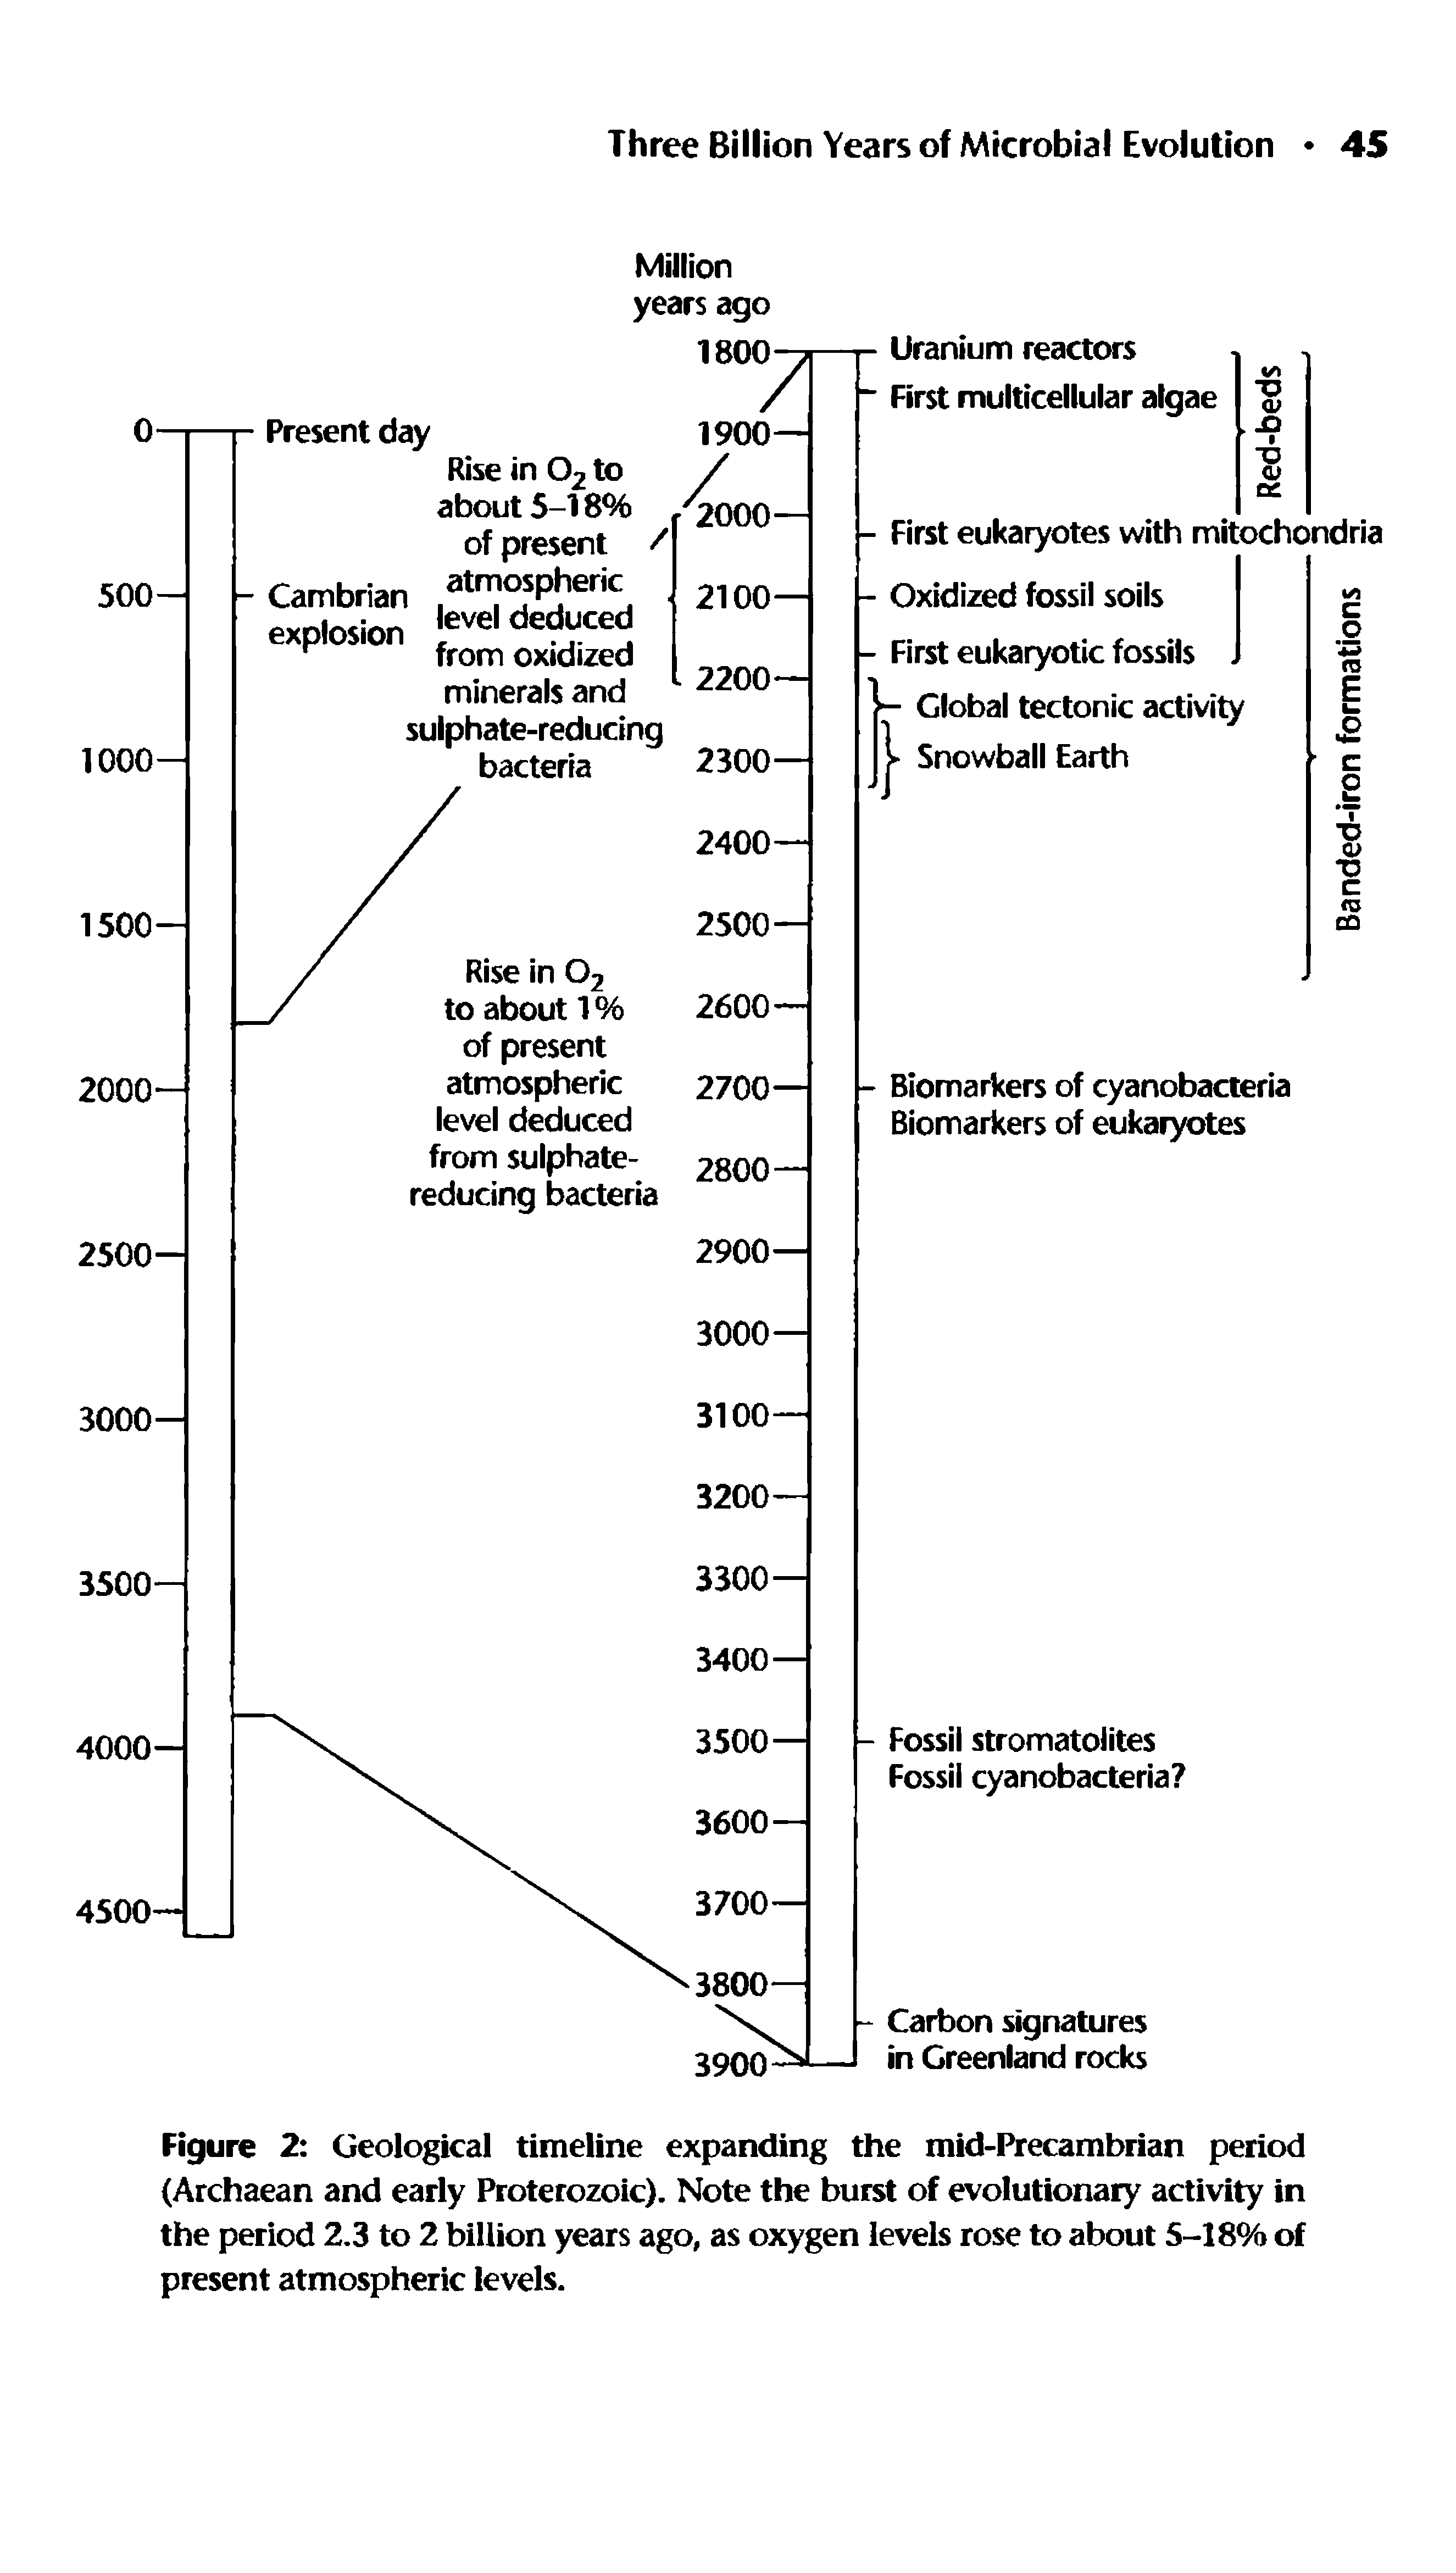 Figure 2 Geological timeline expanding the mid-Precambrian period (Archaean and early Proterozoic). Note the burst of evolutionary activity in the period 2.3 to 2 billion years ago, as oxygen levels rose to about 5-18% of present atmospheric levels.